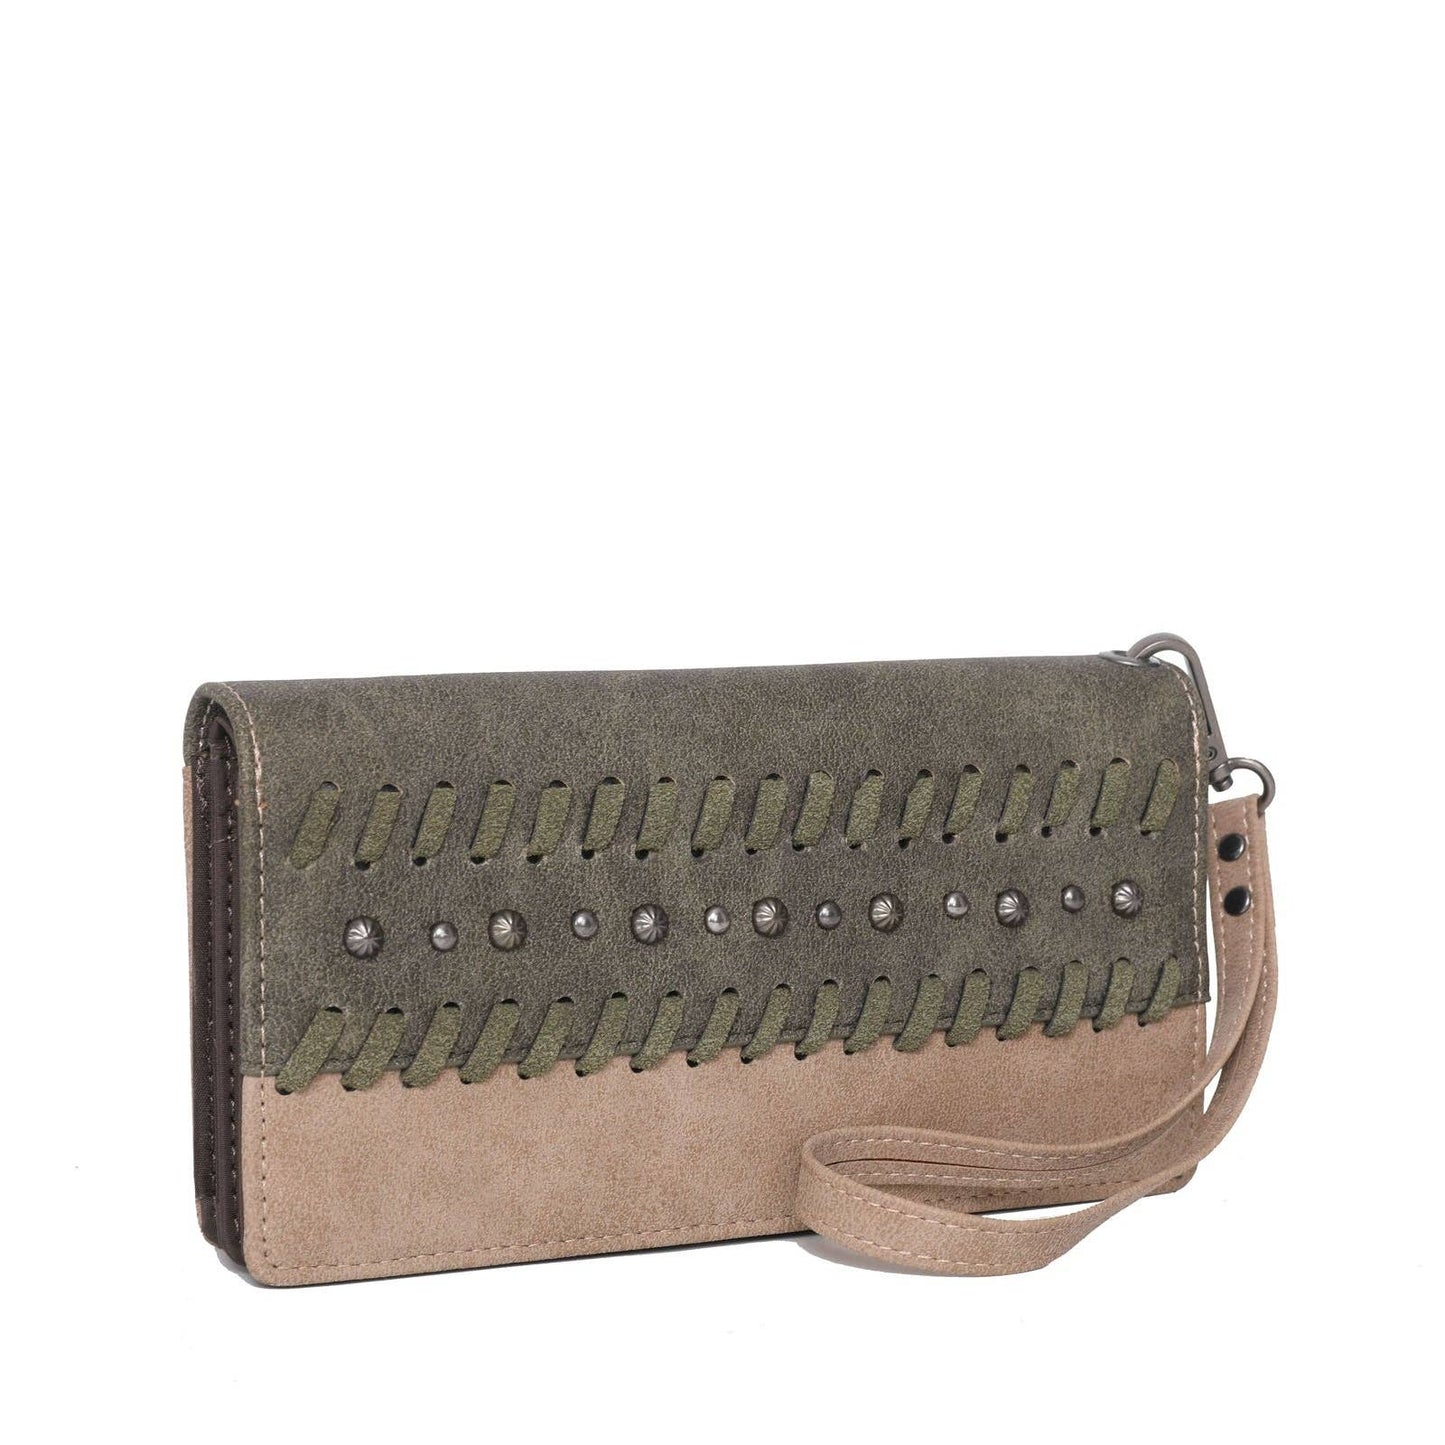 Wrangler Whipstitch and Studs Western Wallet - The Salty Mare